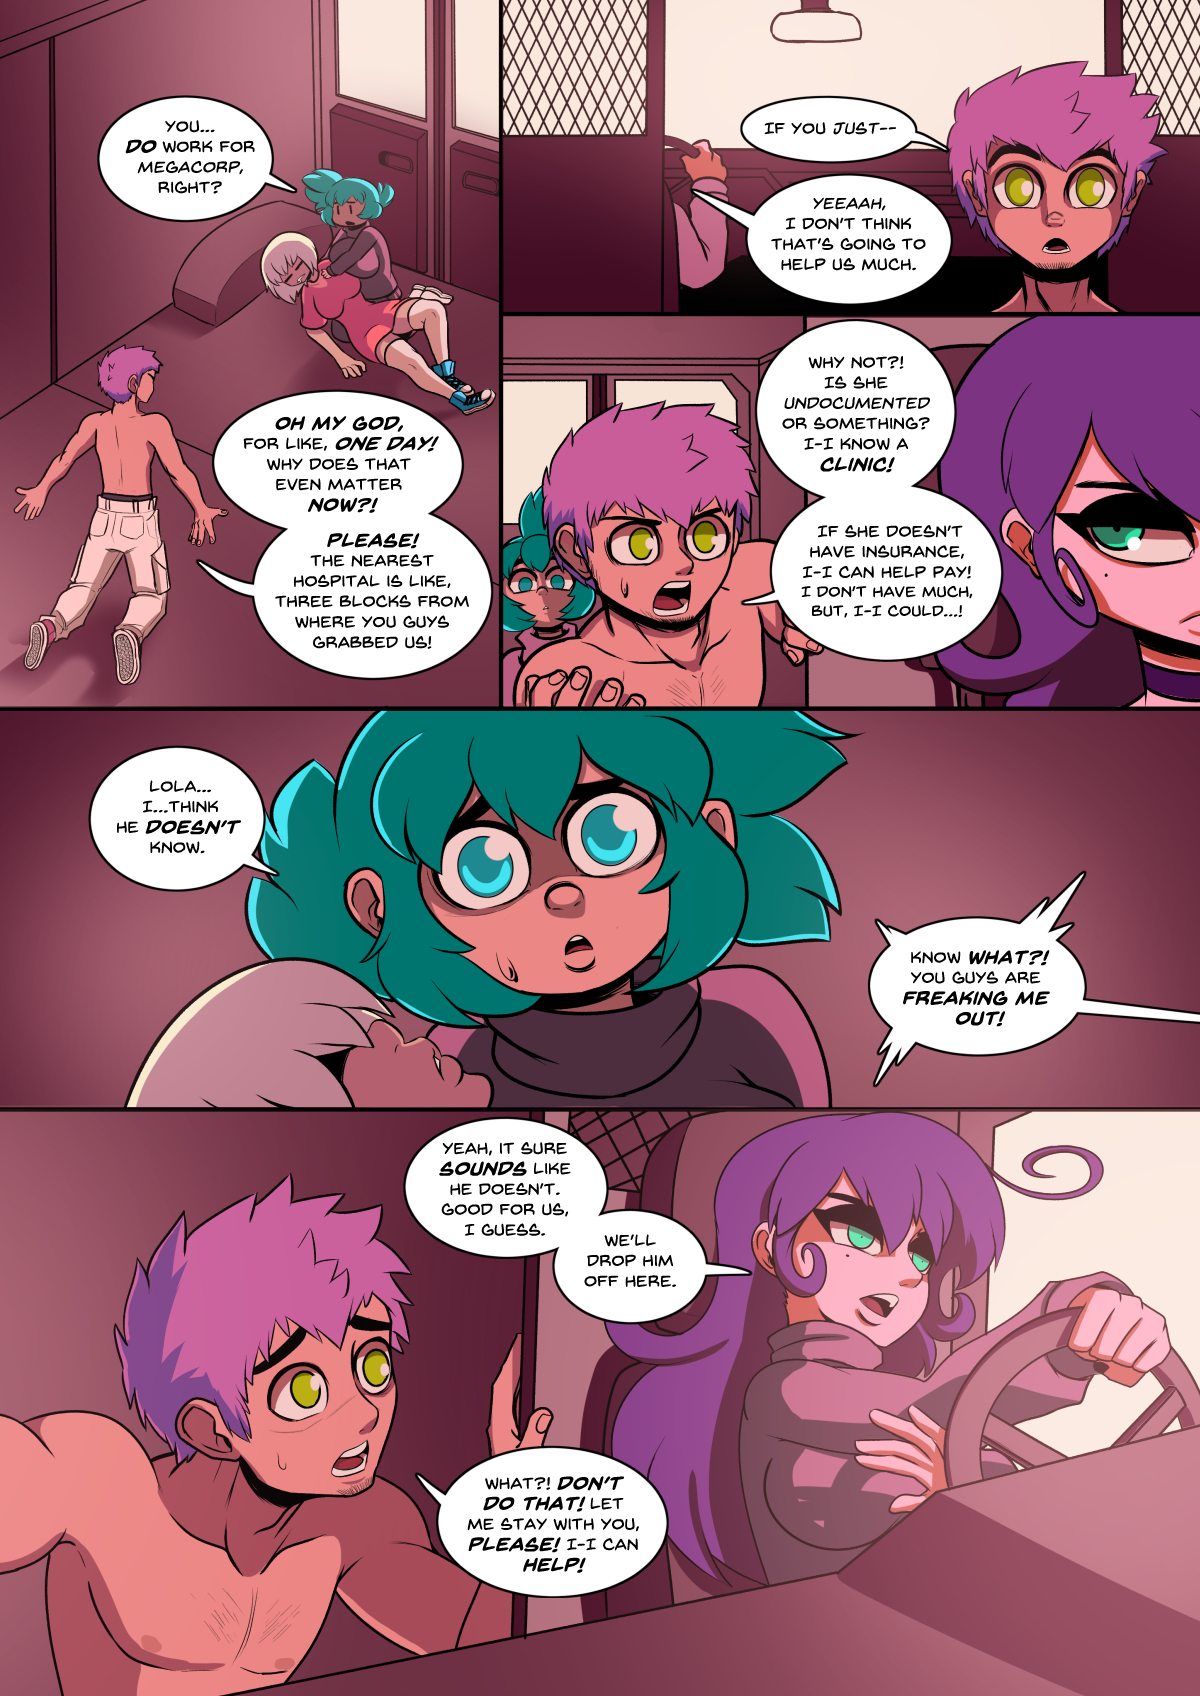 Erotech chapter 4 by Fushark and S 